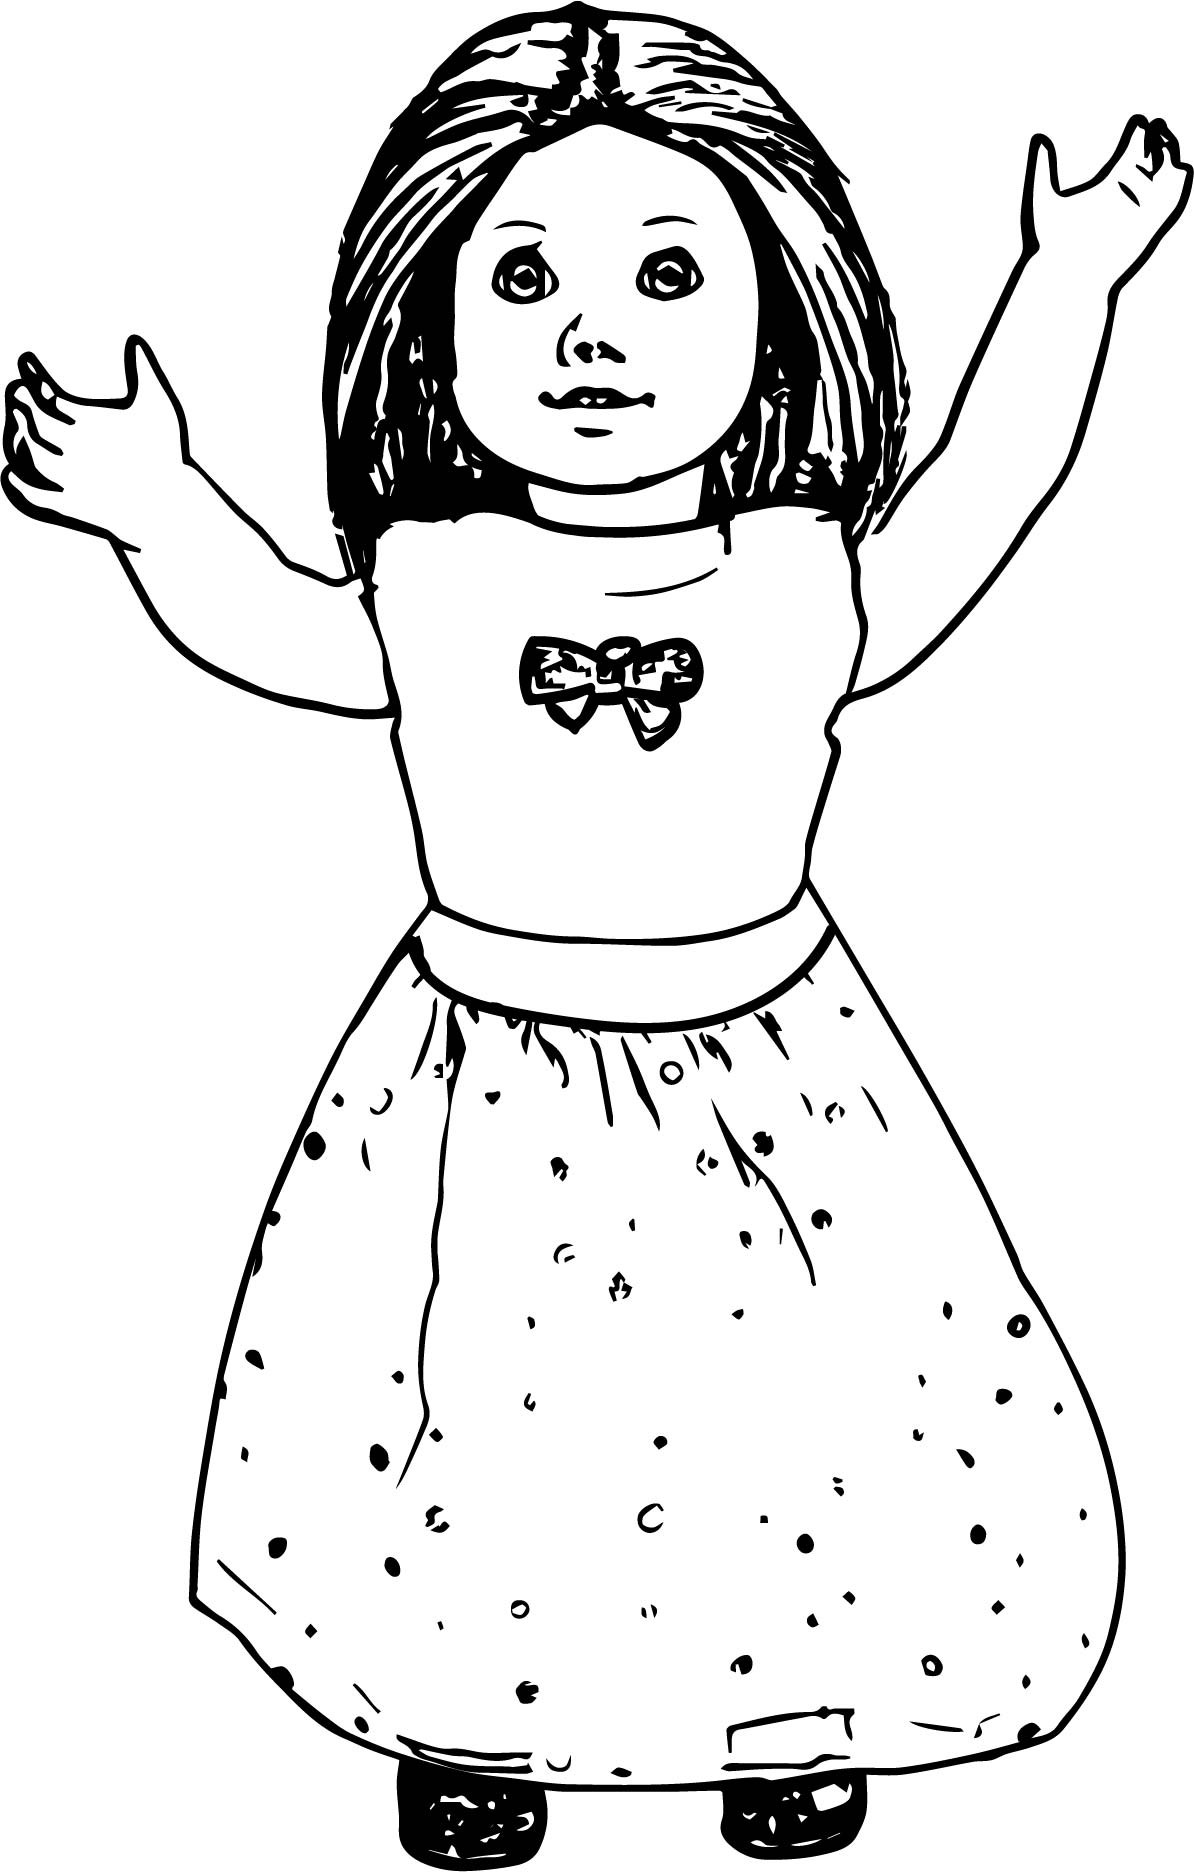 American Girls Coloring Pages
 American Girl Doll Toy Coloring Page